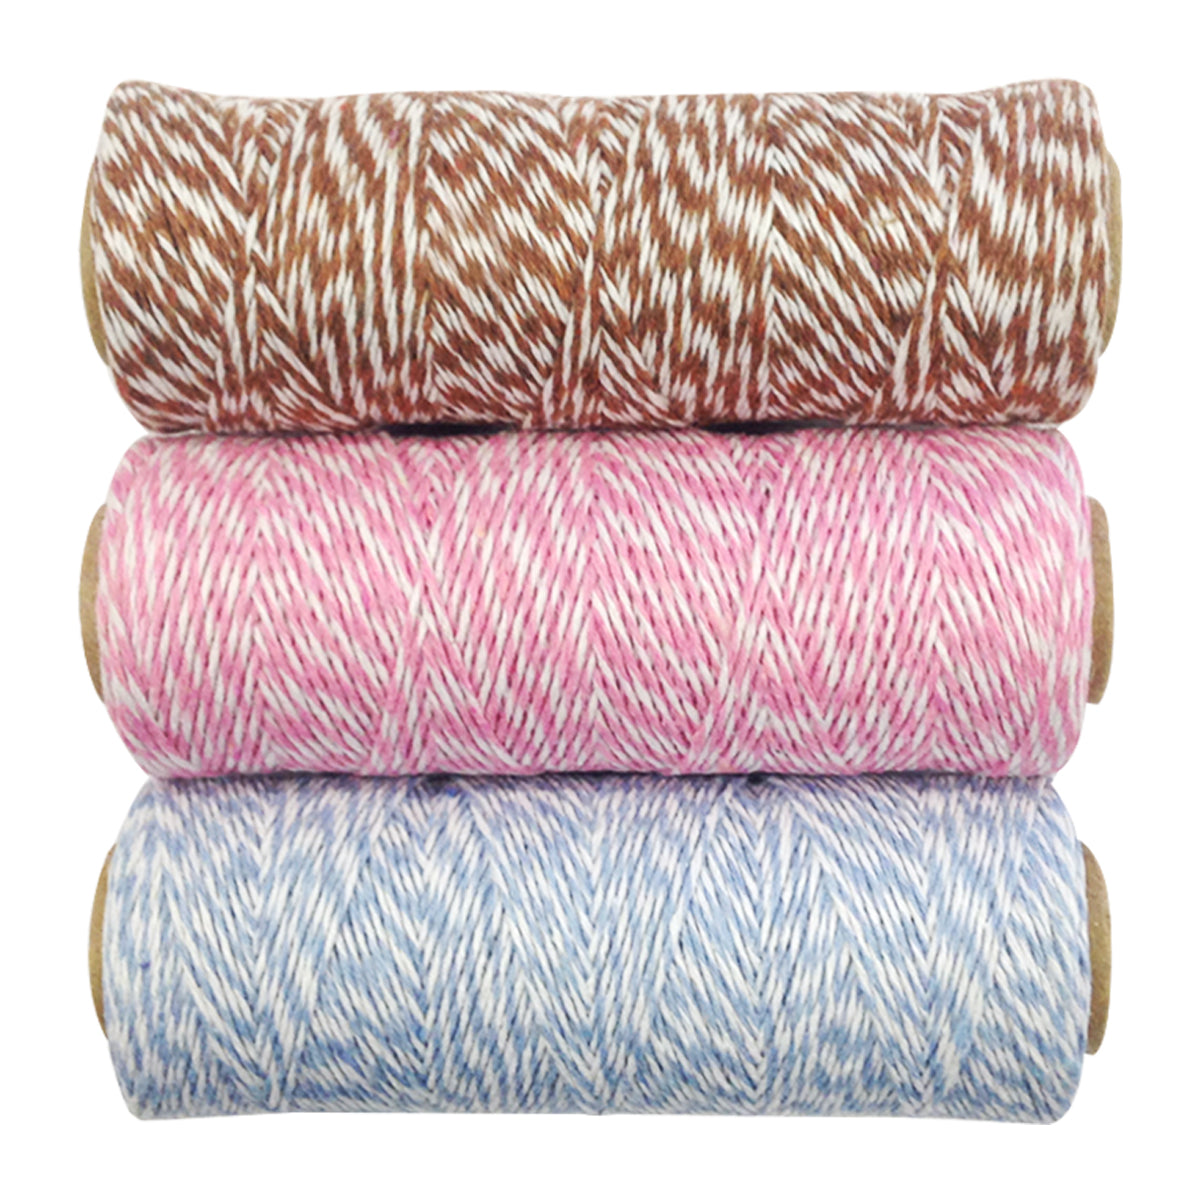 Wrapables Cotton Baker's Twine 4ply 330 Yards (Set of 3 Spools x 110 Yards) Yellow, Red & Grey, Dark Green (A66428, A66832, A66425)